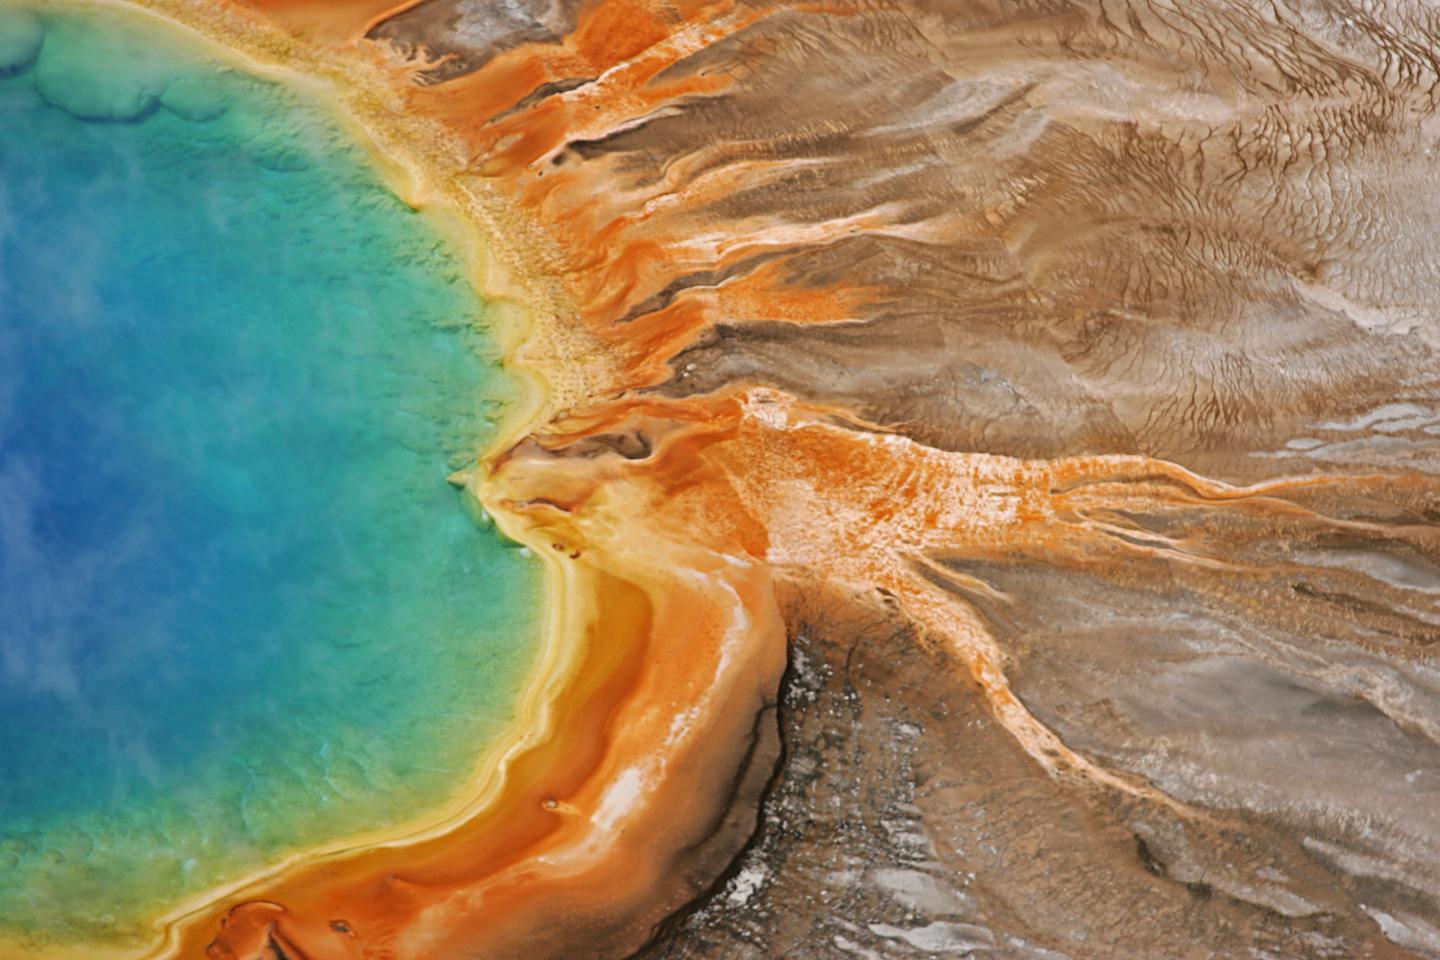 Grand Prismatic SpringThe bright colors found in Grand Prismatic Spring come from thermophiles—microorganisms that thrive in hot temperatures